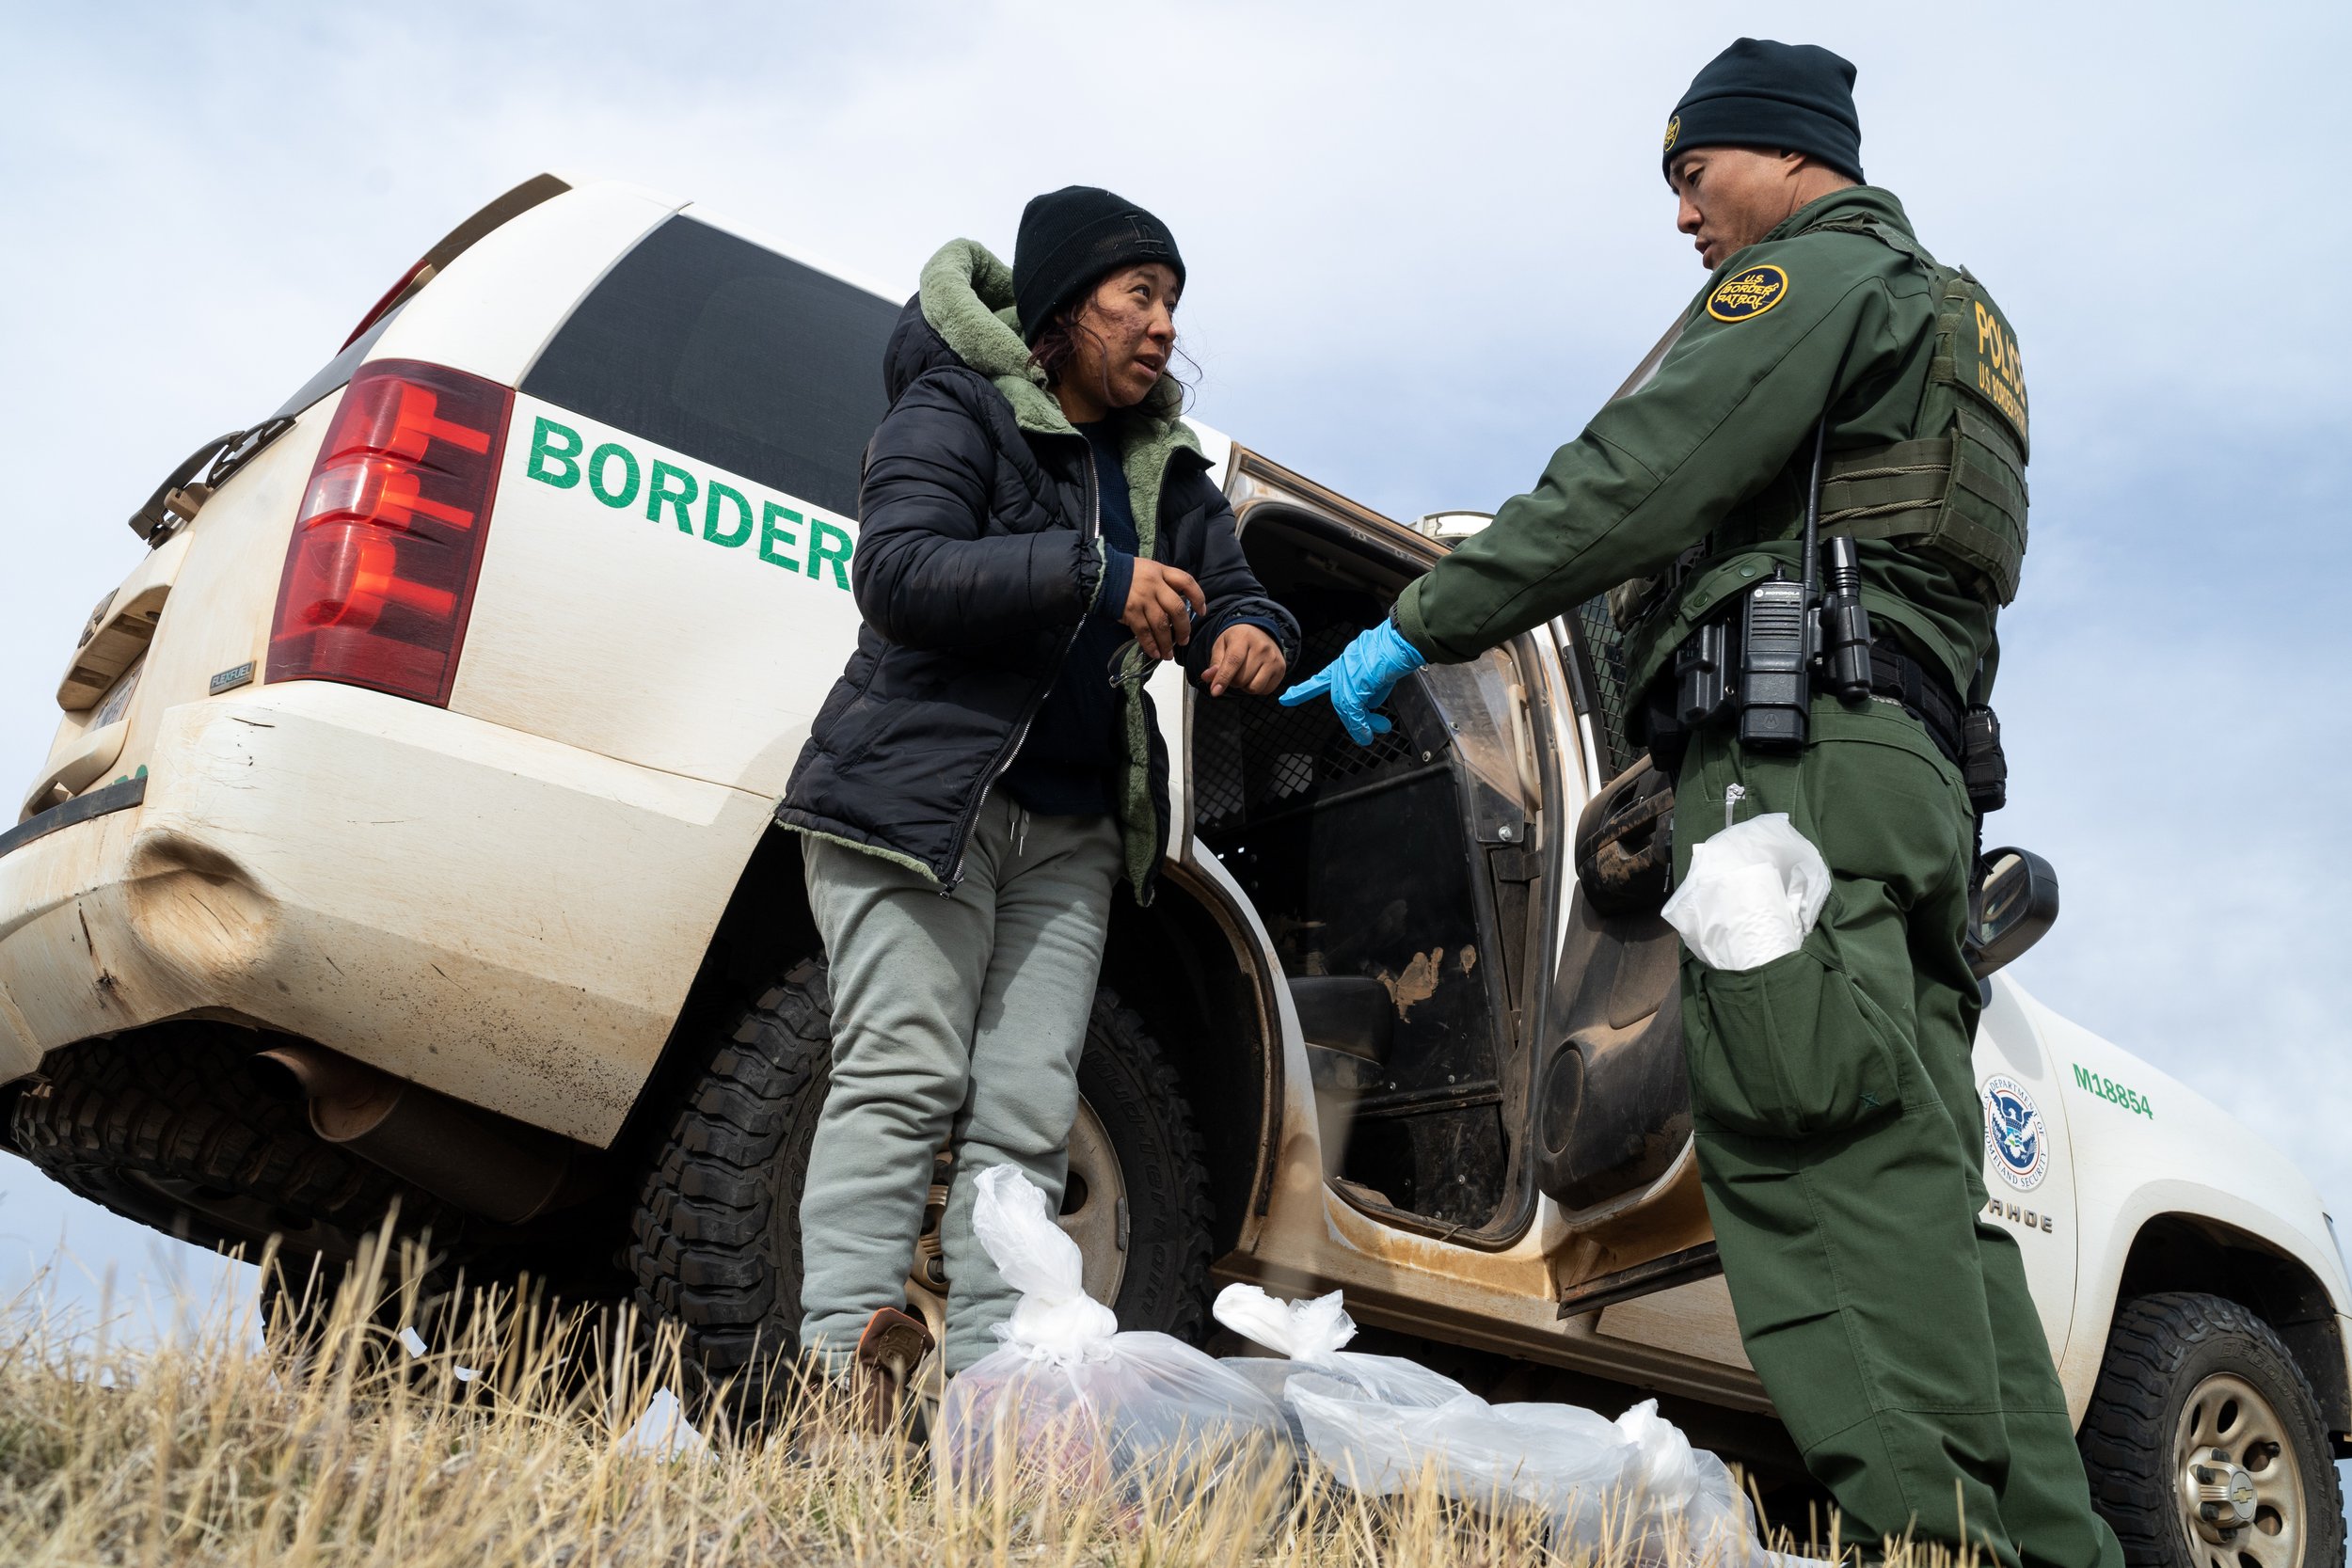  A migrant woman is detained by U.S. Border Patrol on suspicion of illegally entering the United States of America on Friday, Feb. 17, 2023, in Hereford. The woman, along with two other migrants, allegedly got into a car that was waiting for them on 